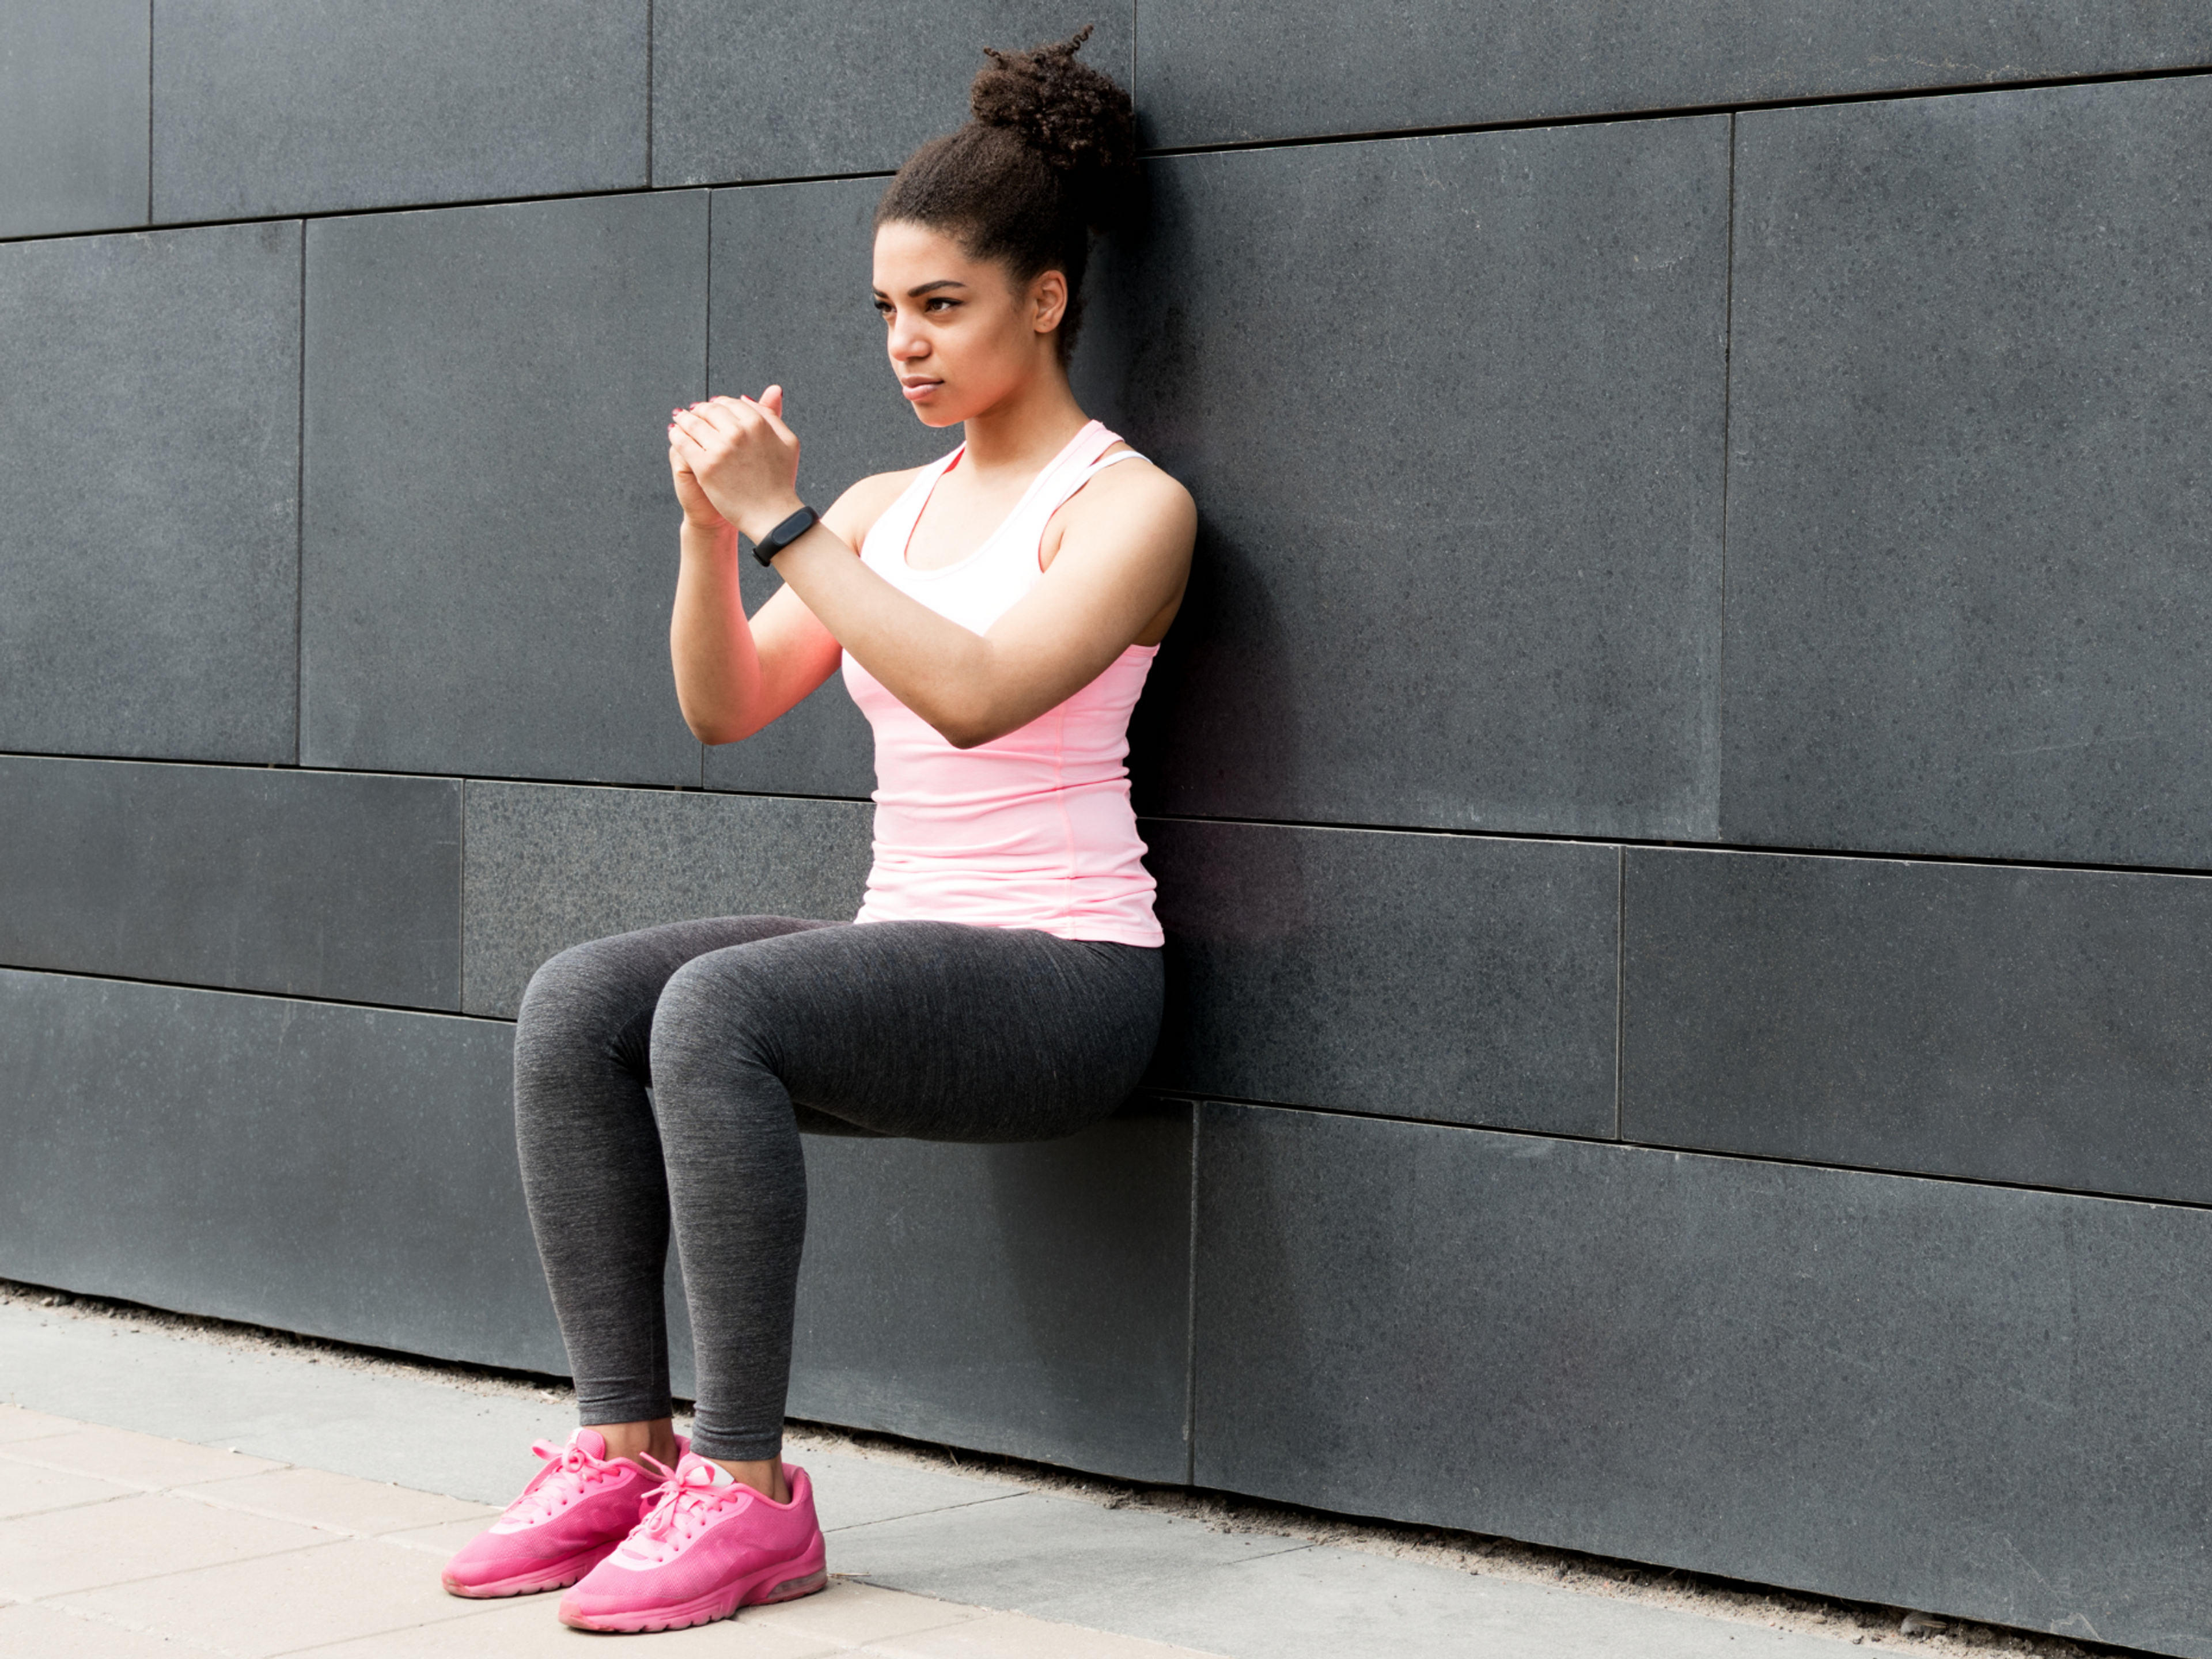 An isometric squat is usually a good starter exercise since it can help reduce the pain from patellar tendonitis.